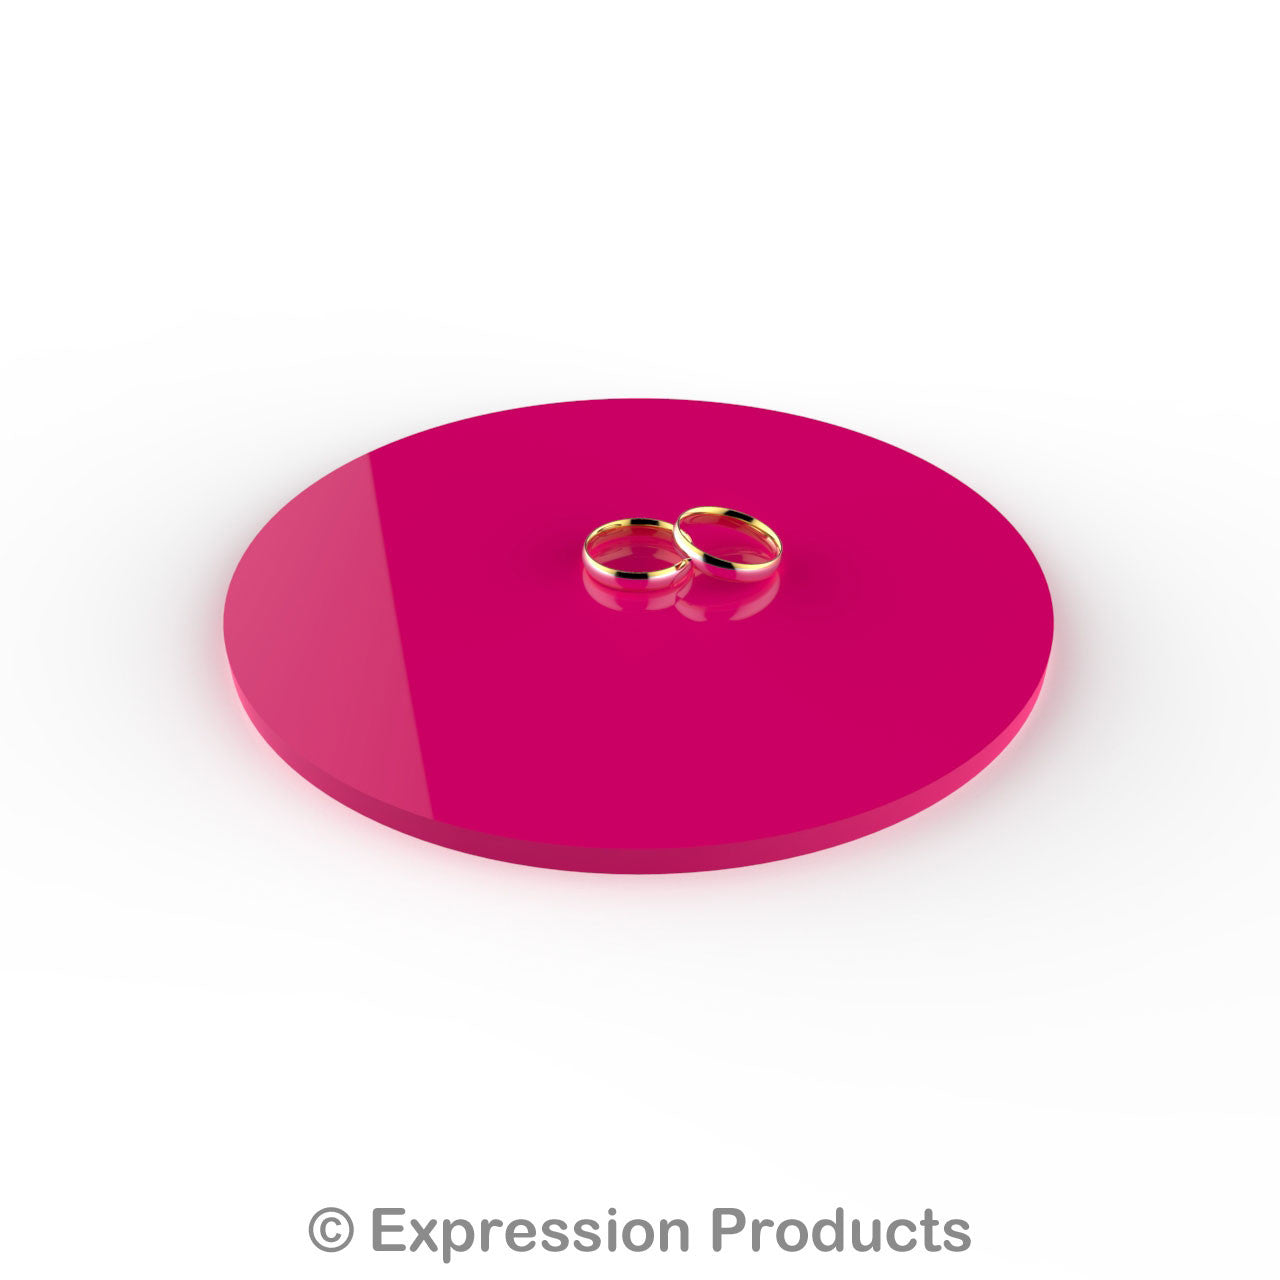 Round Pink Acrylic Cake Display Board 4" - 18" - Expression Products Ltd